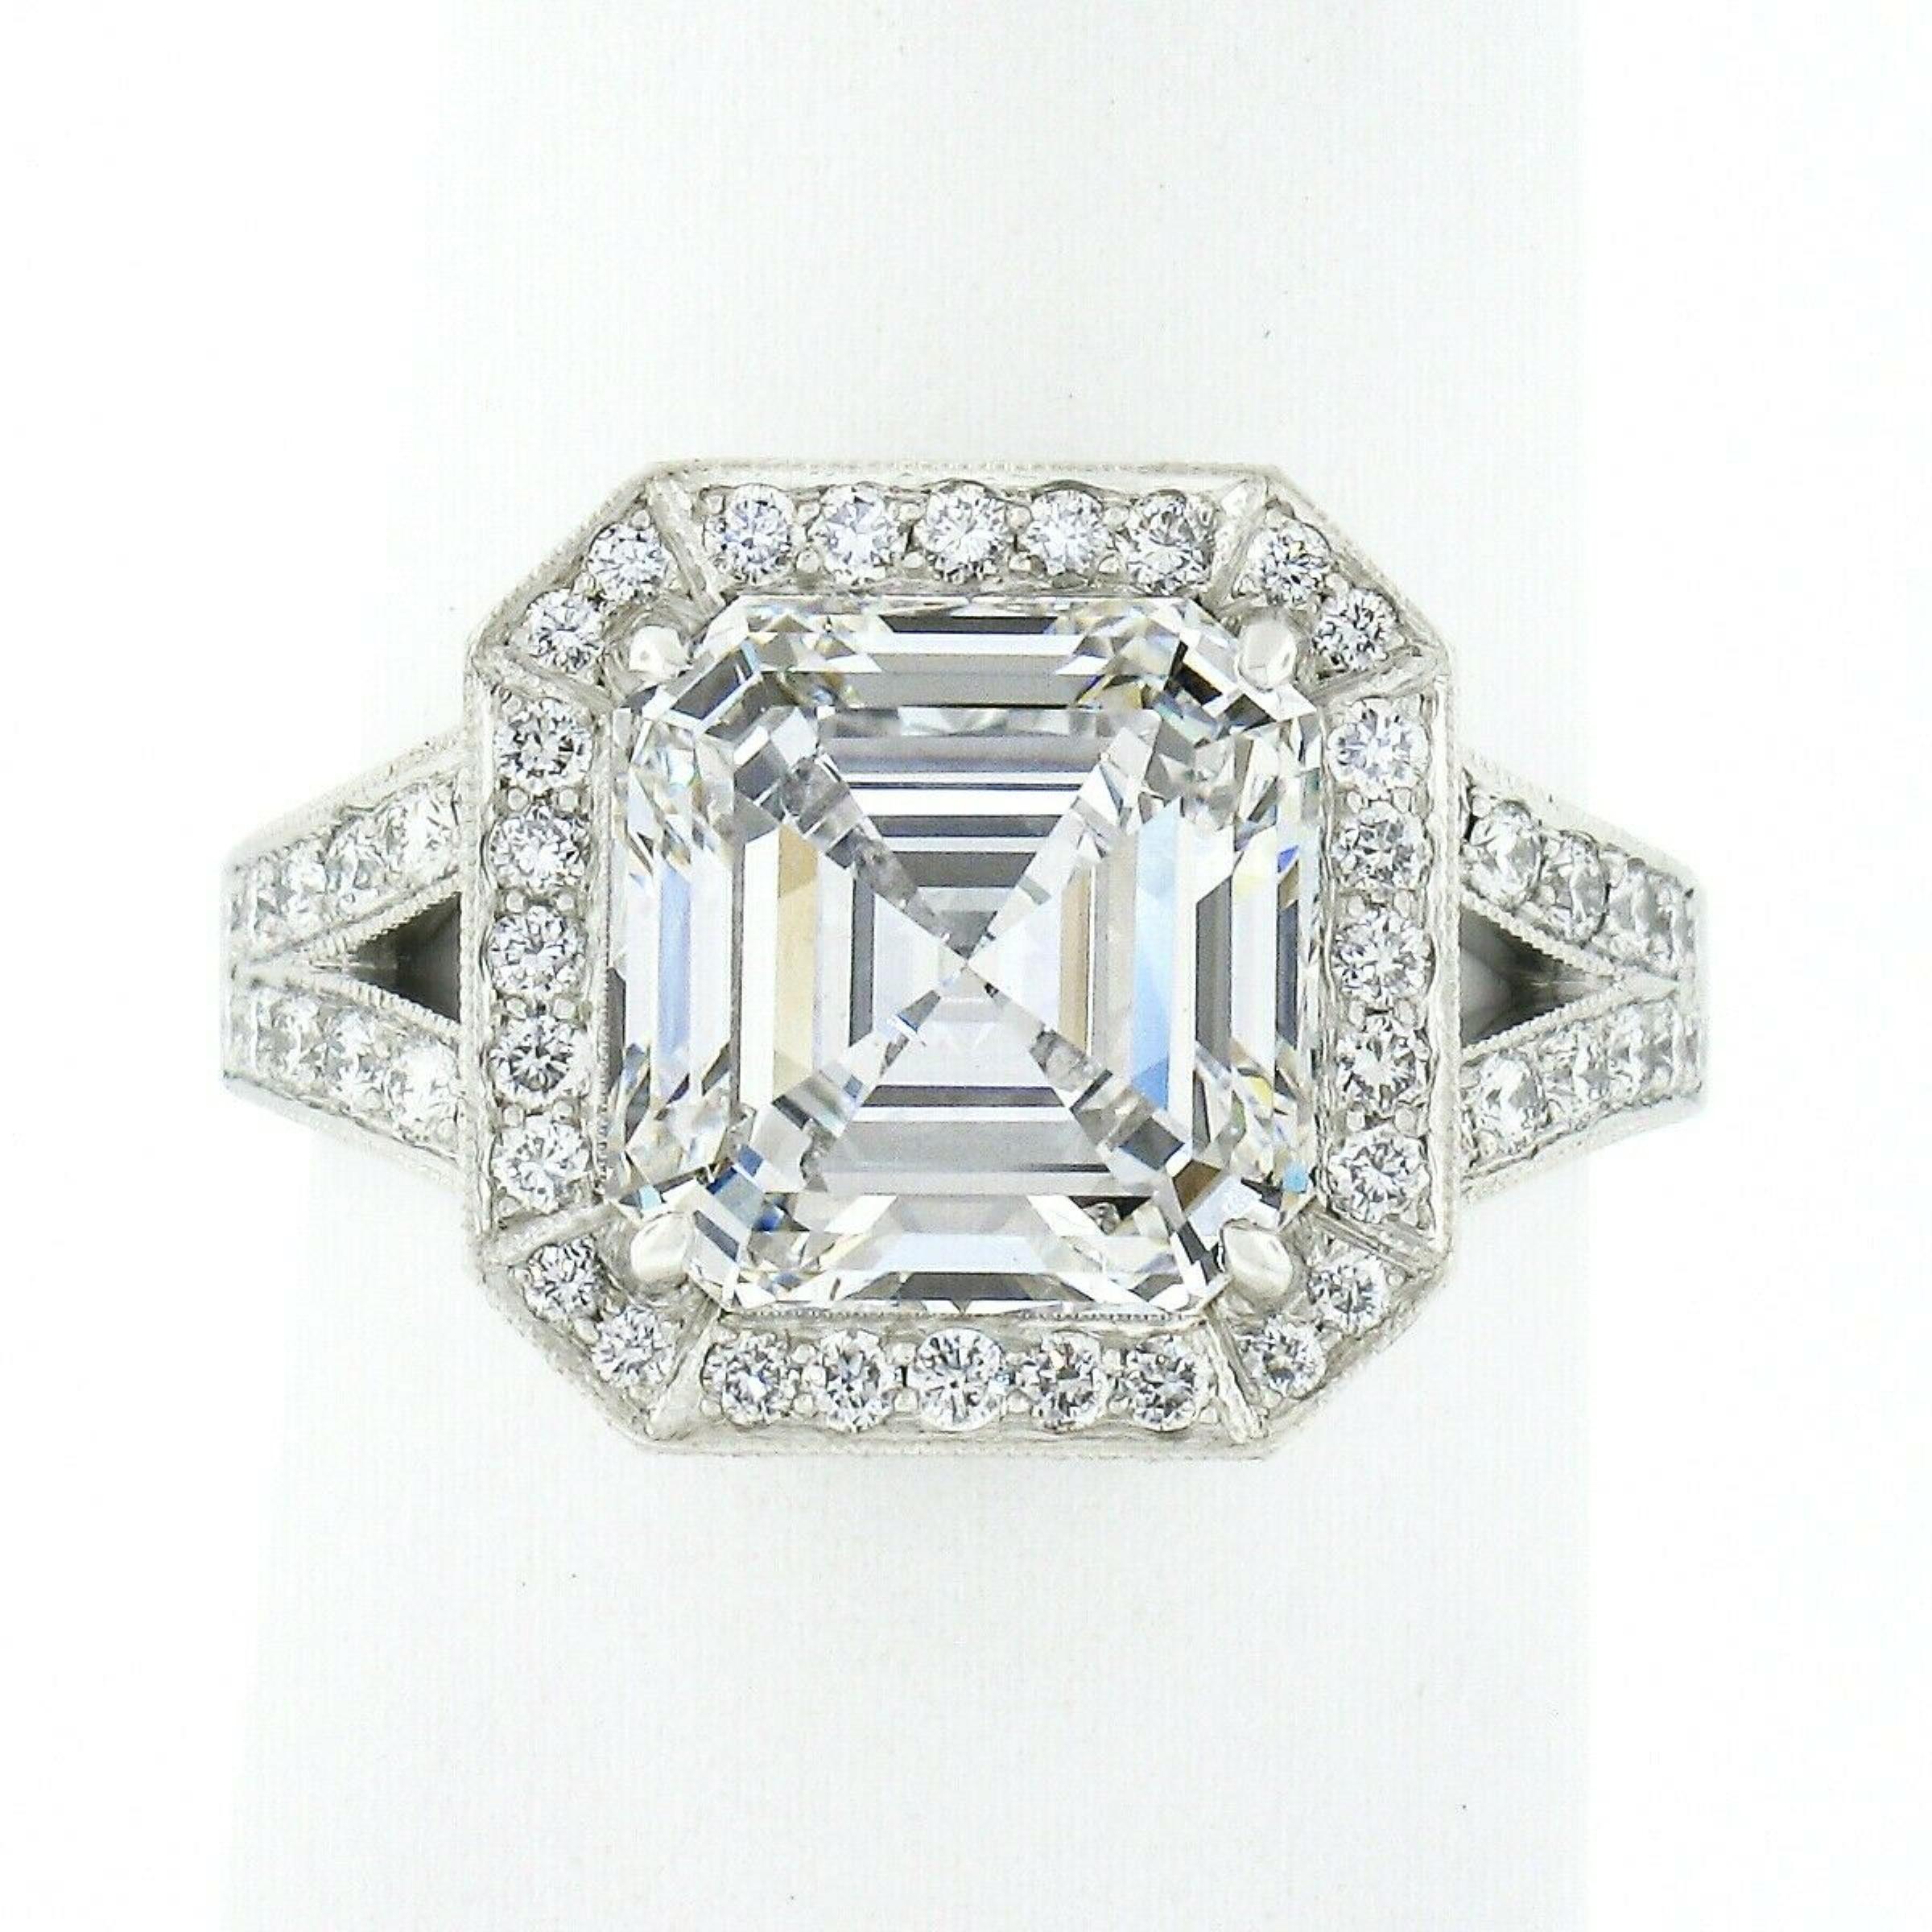 This elegant and fancy diamond engagement ring was designed by William Goldberg and crafted in solid platinum. It features a large, 3.10 carats GIA certified center diamond that is absolutely spectacular and showcases magnificent amount of sparkle